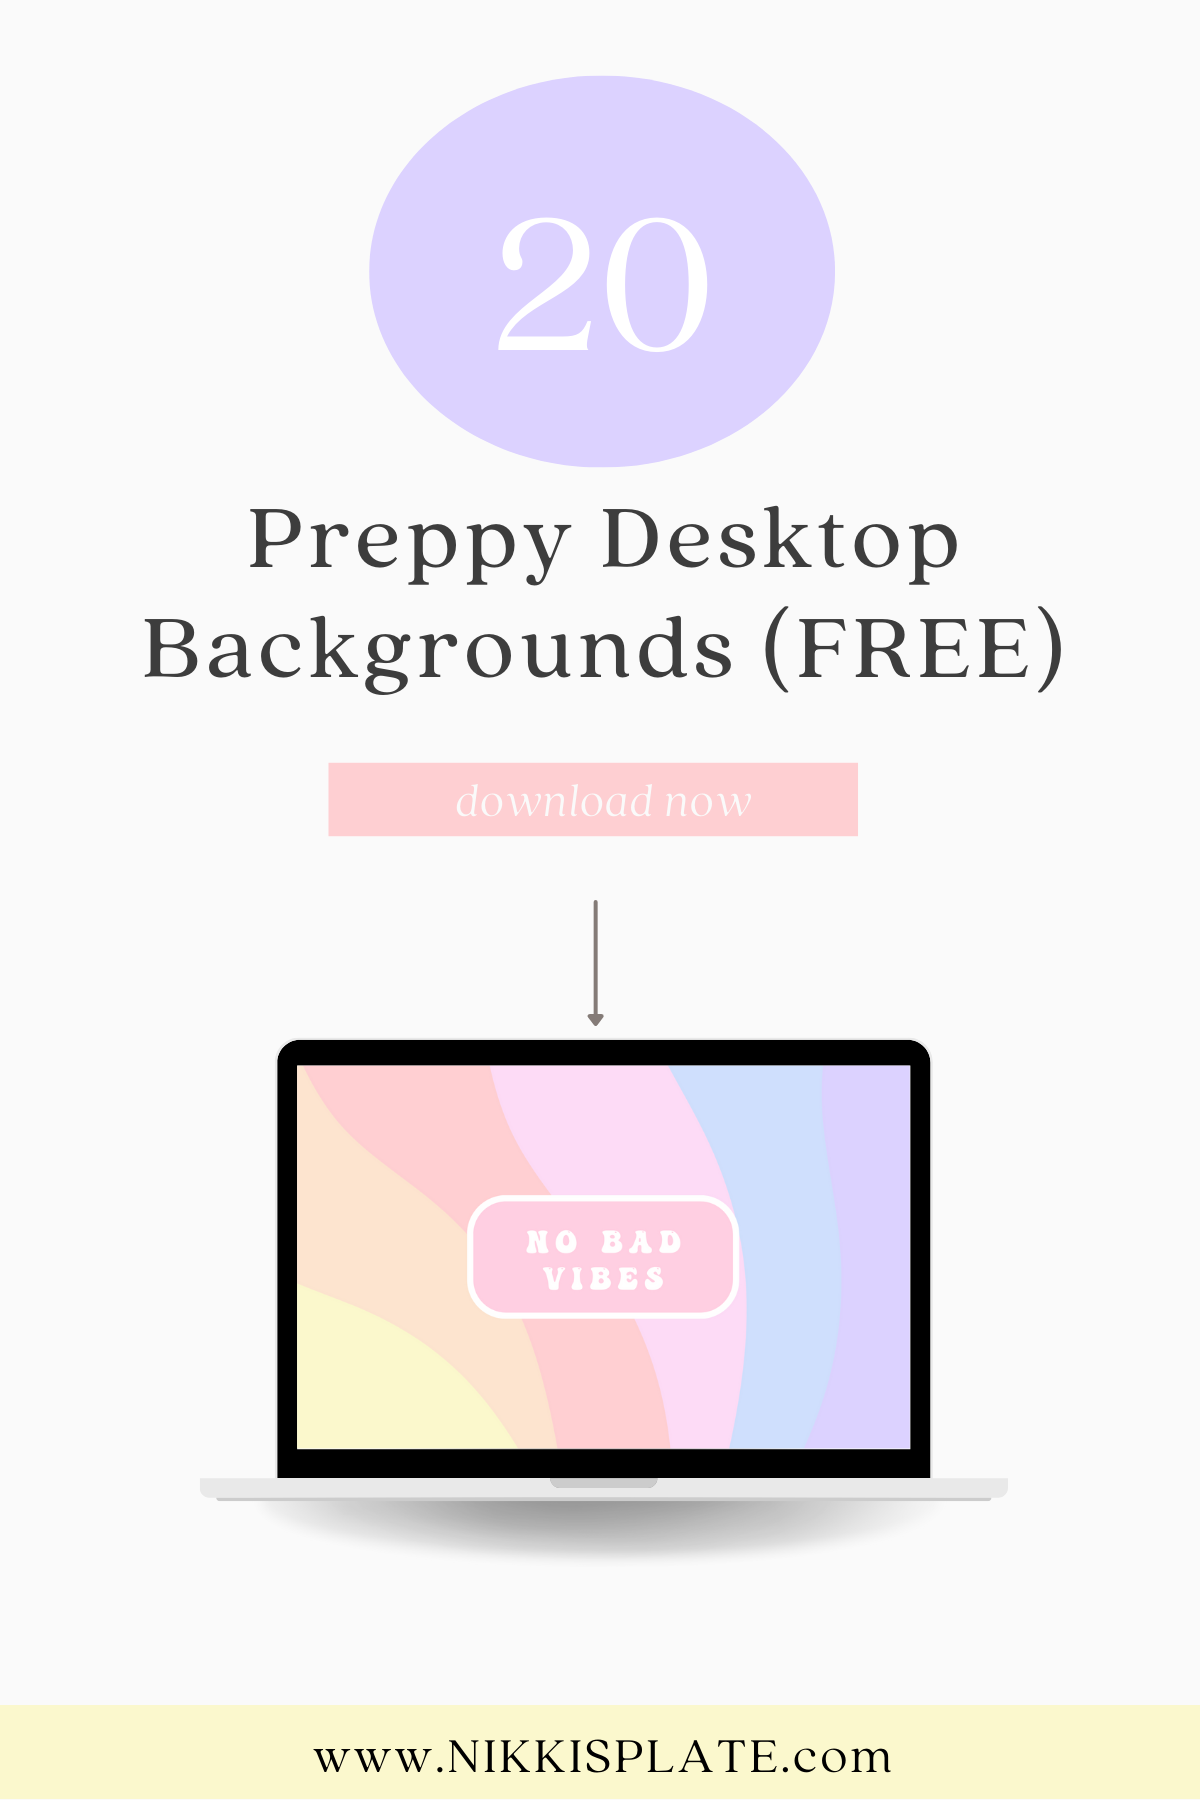 Looking for preppy wallpaper designs for your computer/laptop? I have you covered with these 20 beautiful preppy aesthetic wallpaper designs you can download for FREE!